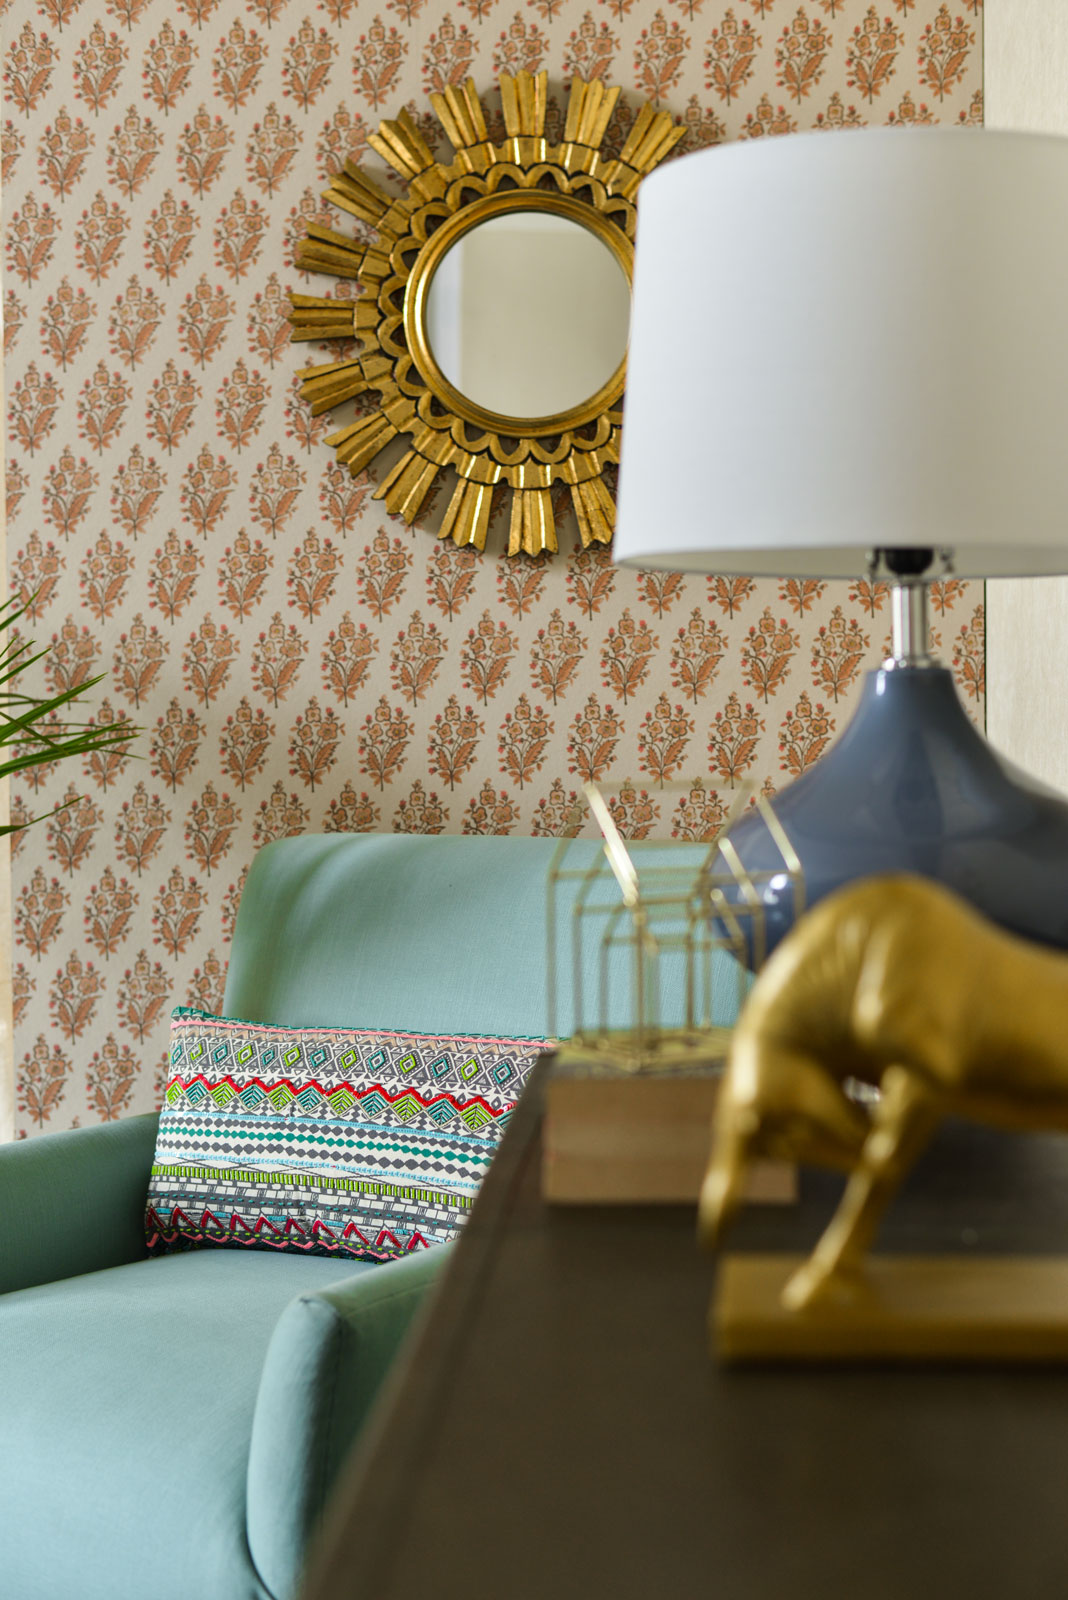 Living Room Design Ideas With Patterned Wall Texture & Golden Accents  - Beautiful Homes